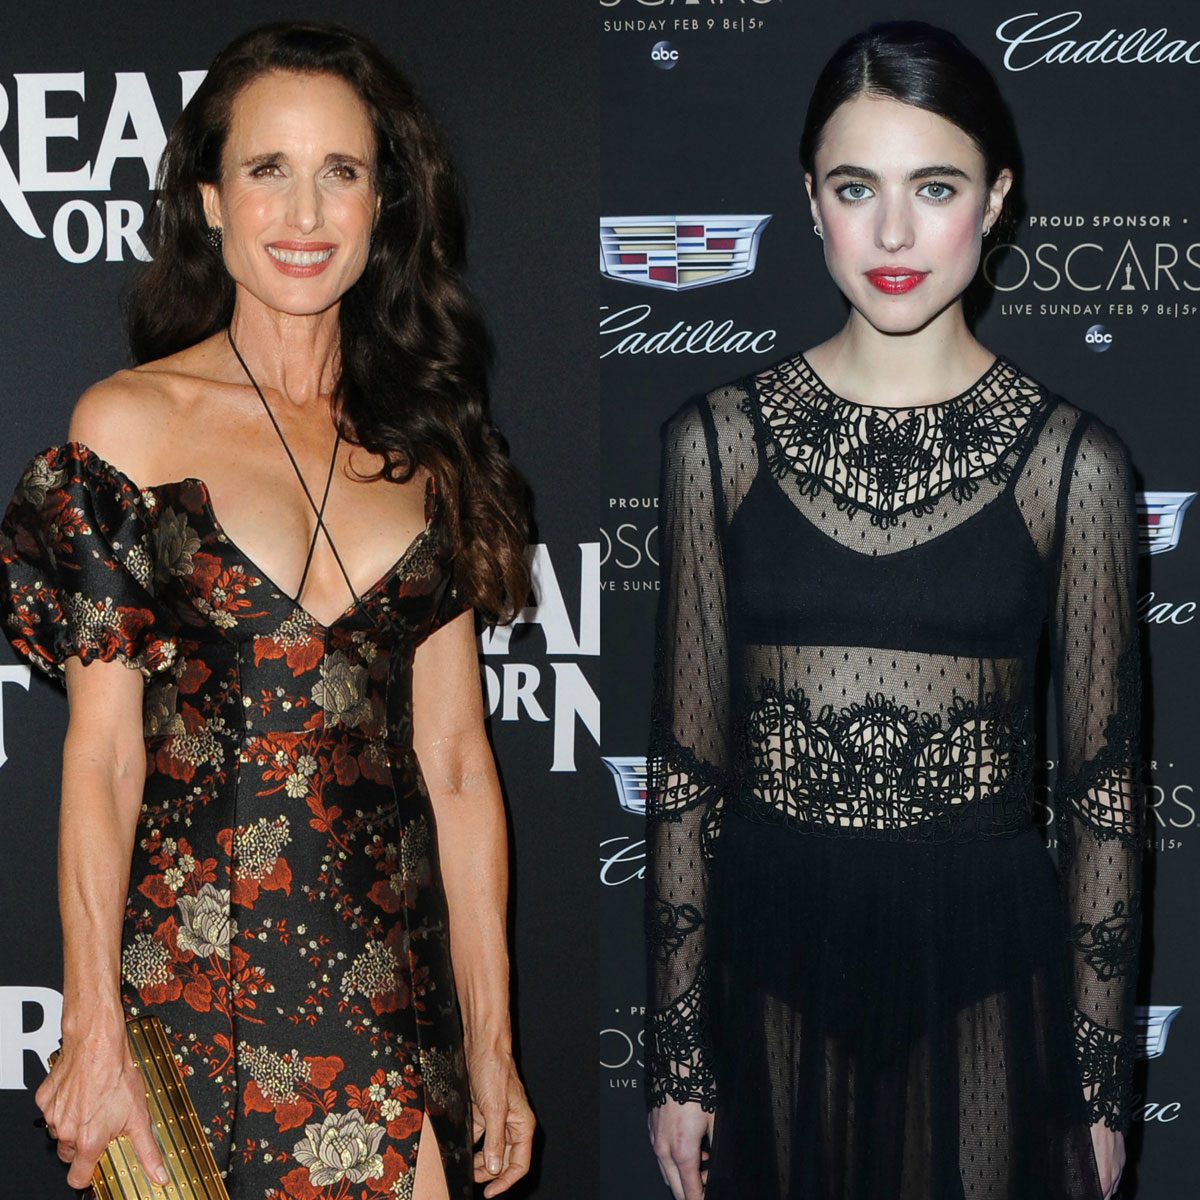 Andi MacDowell and Margaret Qualley are related